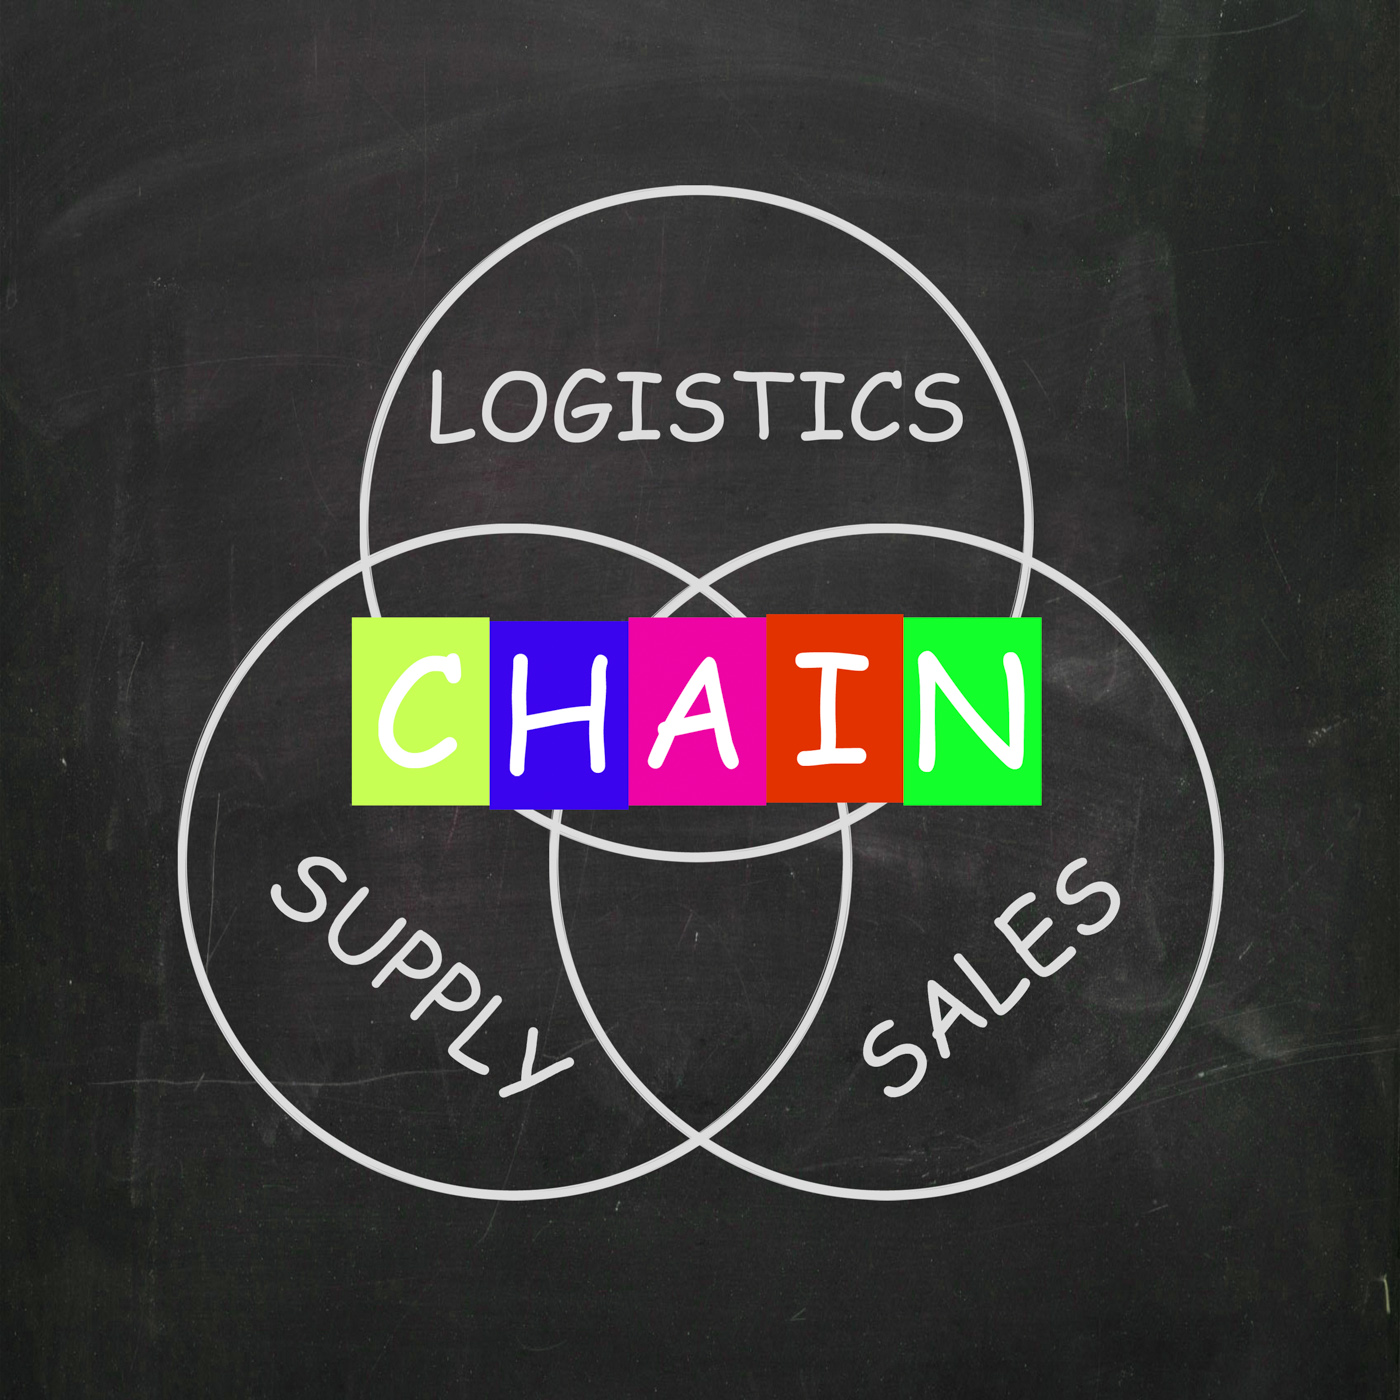 Sales and supply included in a chain of logistics photo